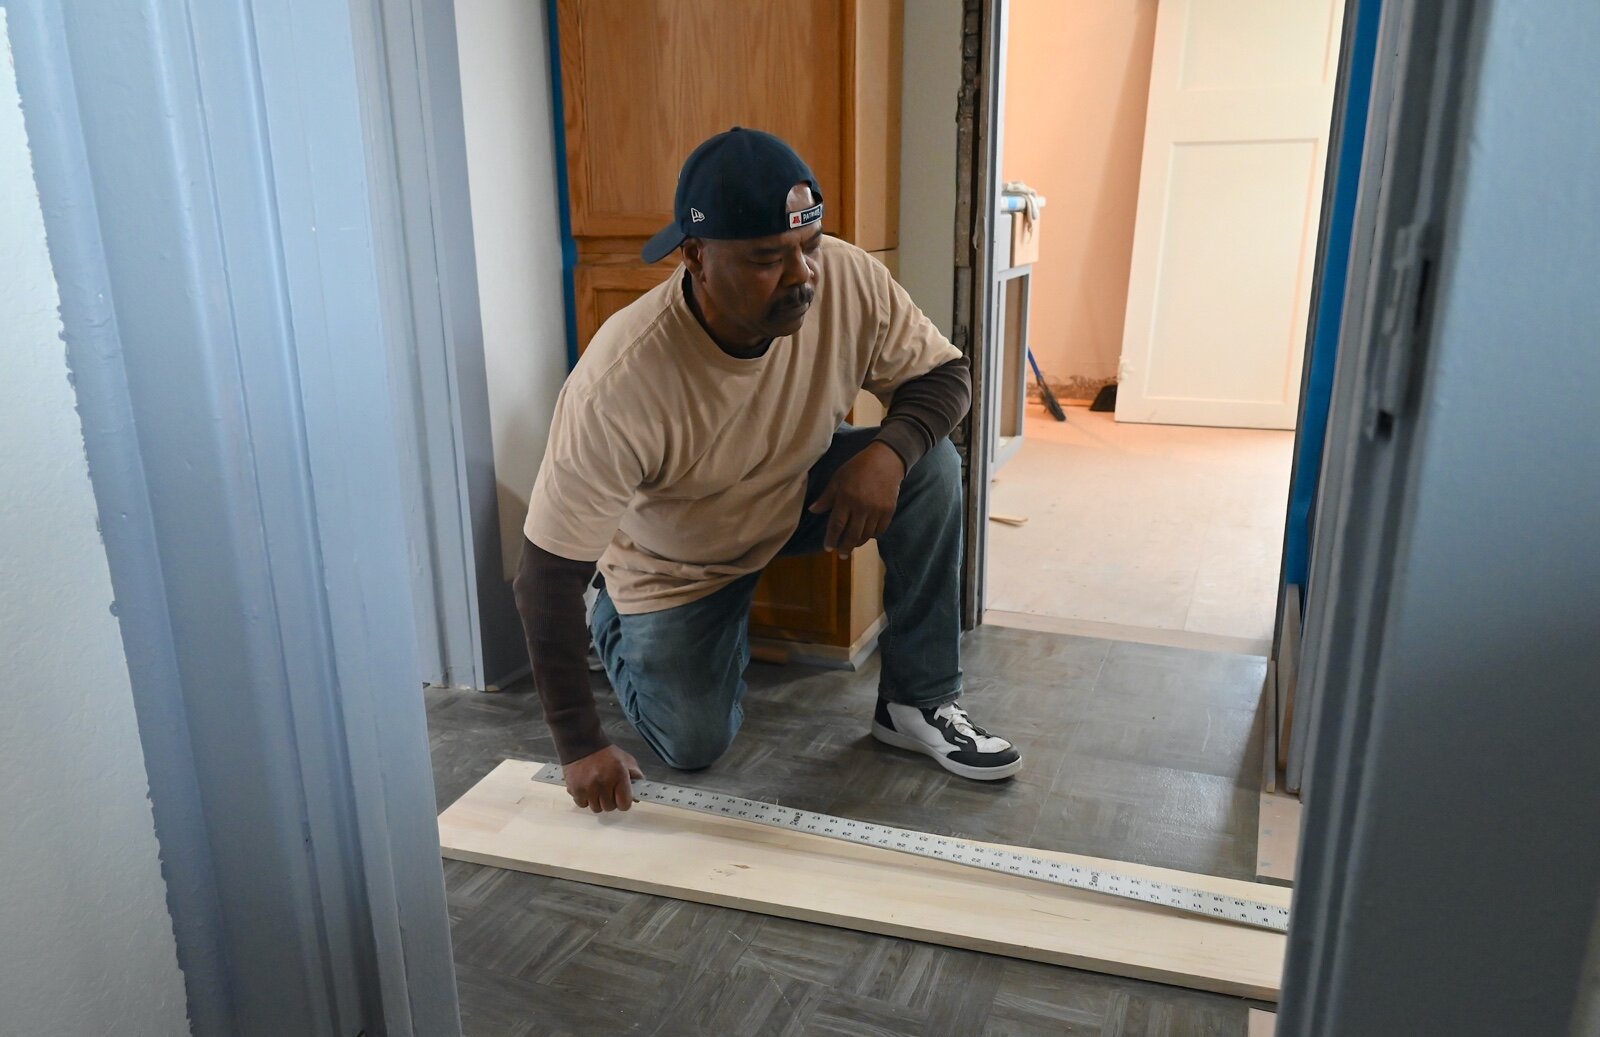 Robert Holley works on the flooring of the house at 238 Greenwood Avenue that Washington Heights United Methodist Church bought and is renovating.